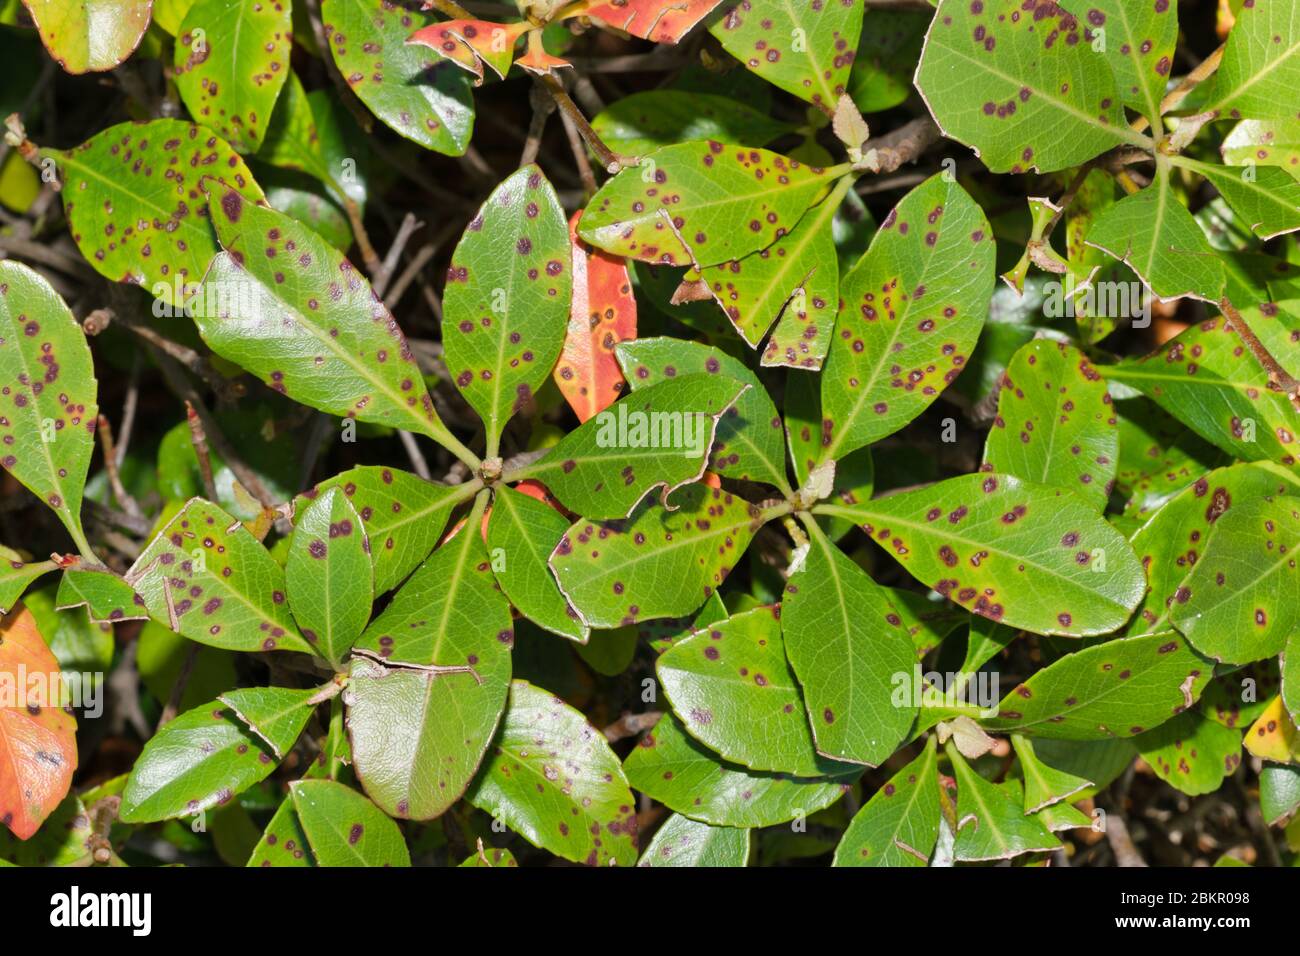 Leaf Spot disease on Indian Hawthorn plant leaves. Condition caused by parasitic fungi or bacteria. Treatable in most cases. Close up full frame image. Stock Photo